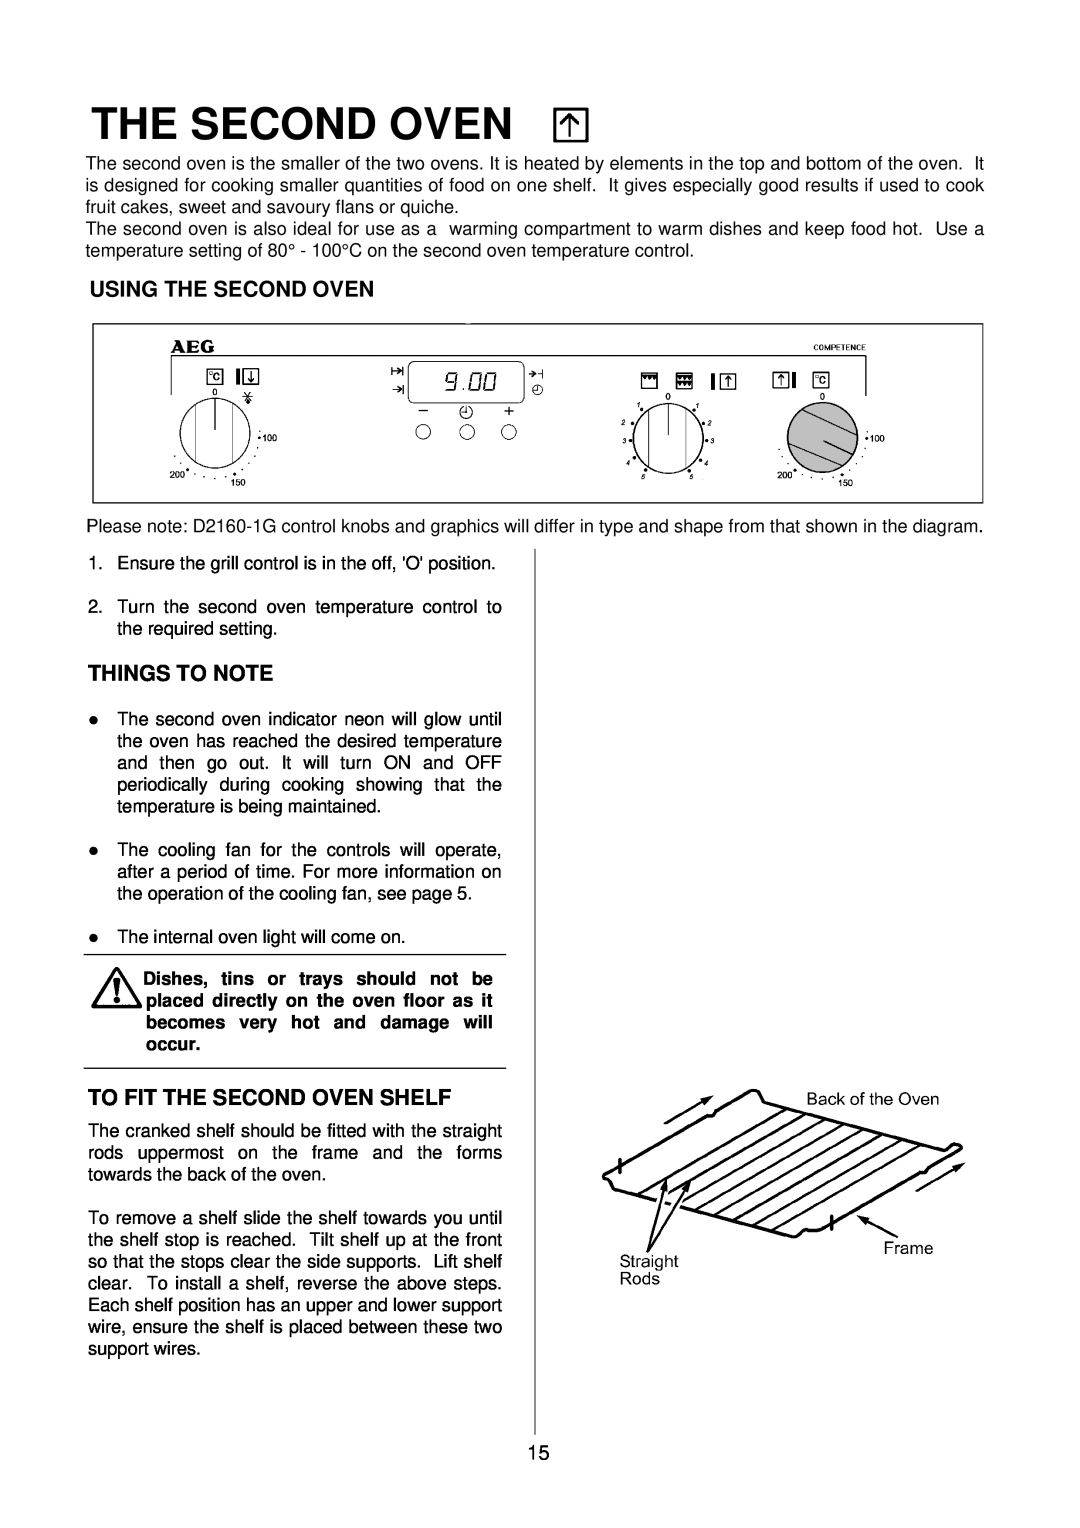 Electrolux D2160-1 operating instructions Using The Second Oven, To Fit The Second Oven Shelf, Things To Note 